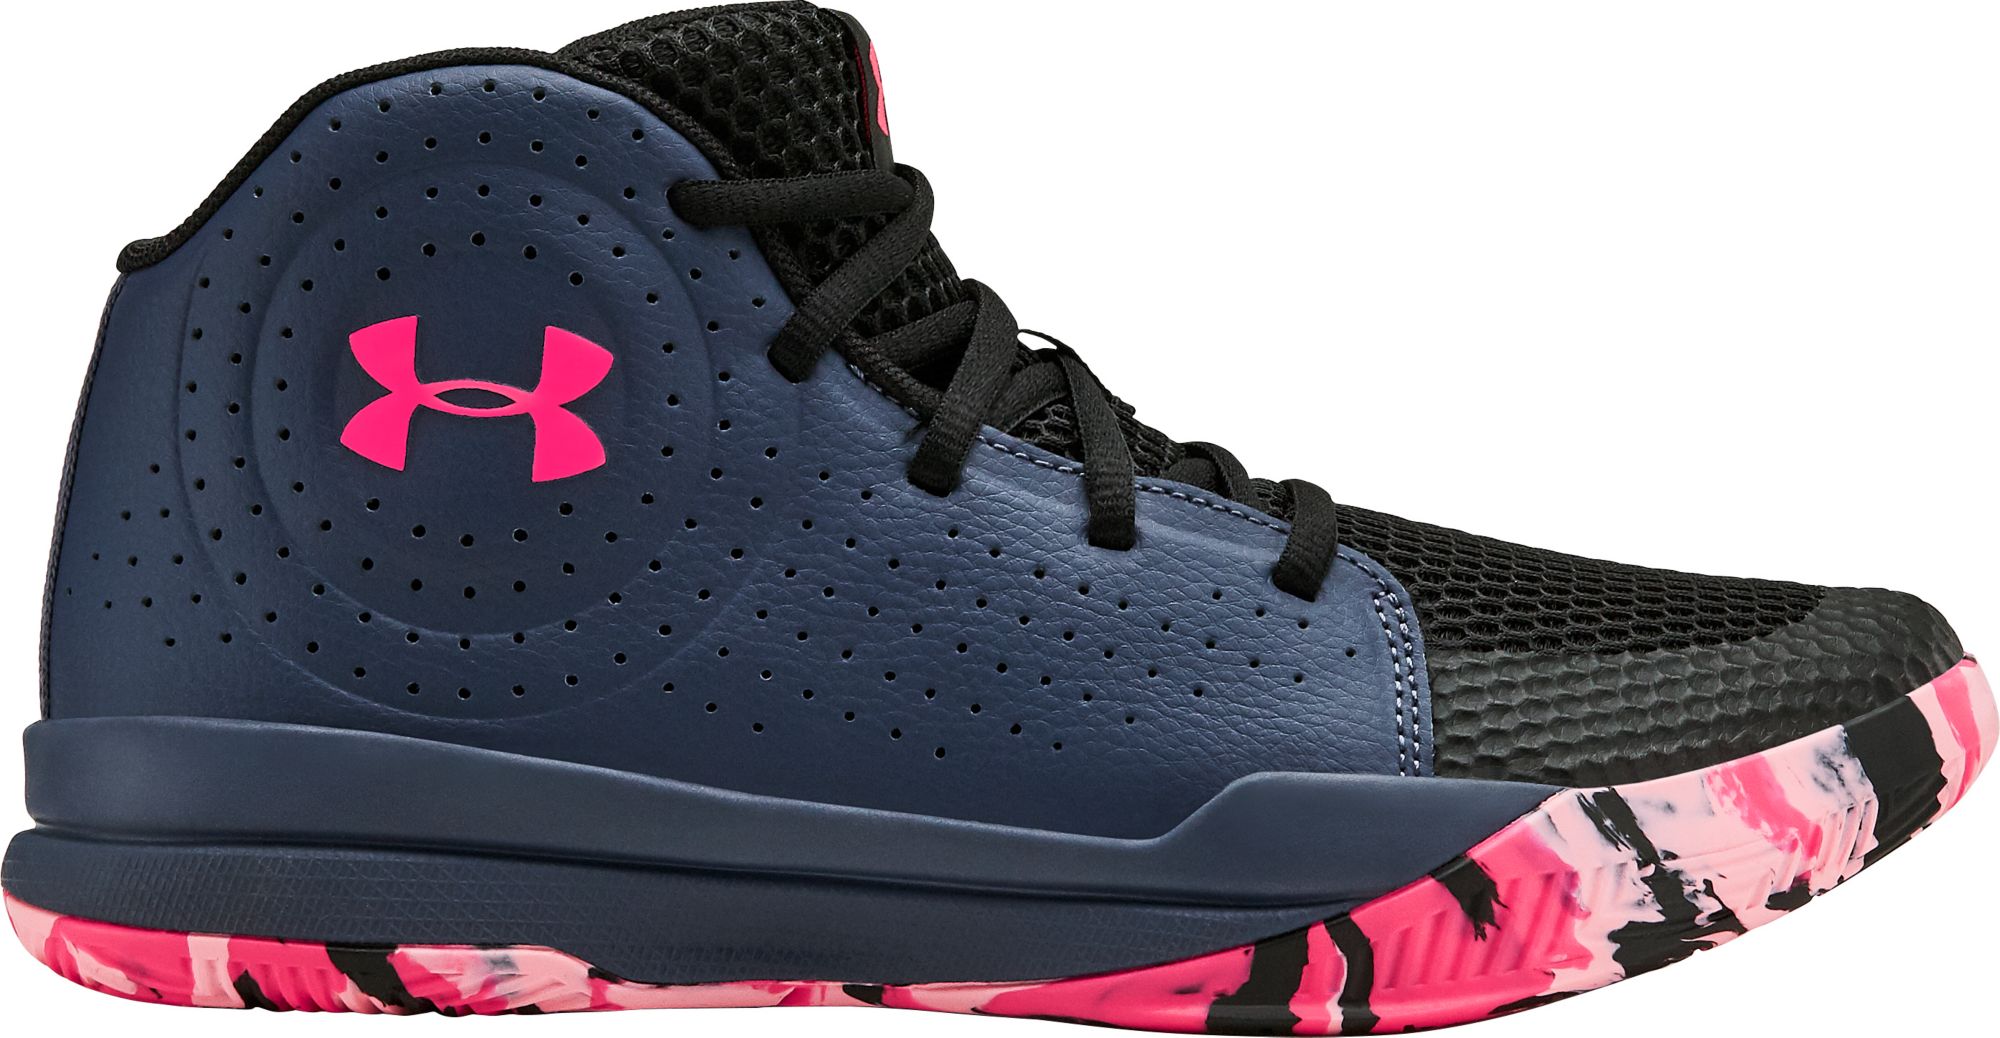 pink basketball shoes 2019